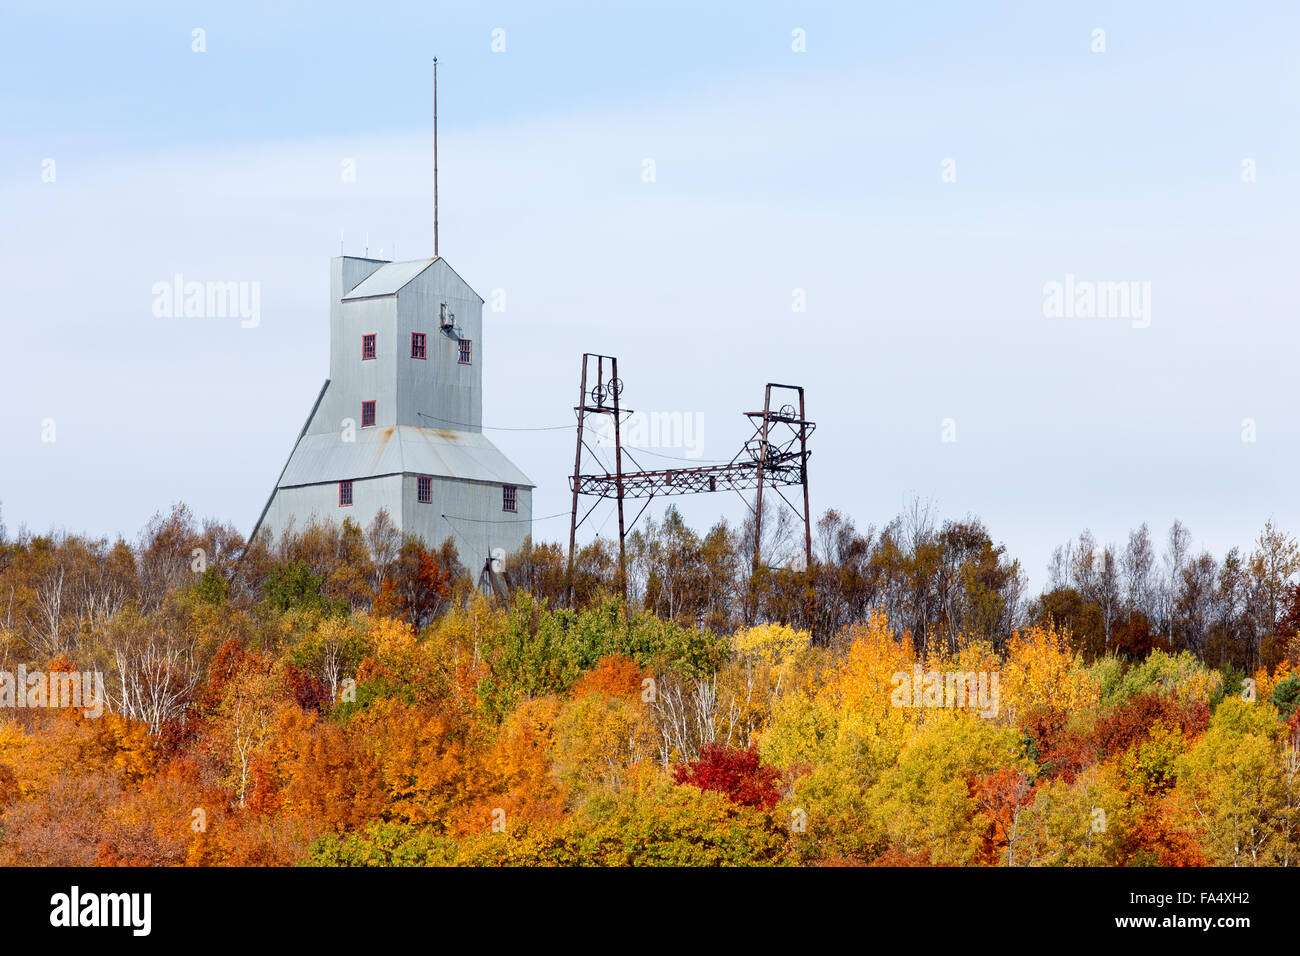 Abandoned mine shaft house and other industrial structure on a hill and behind a cluster of trees in brilliant autumn colors. Stock Photo